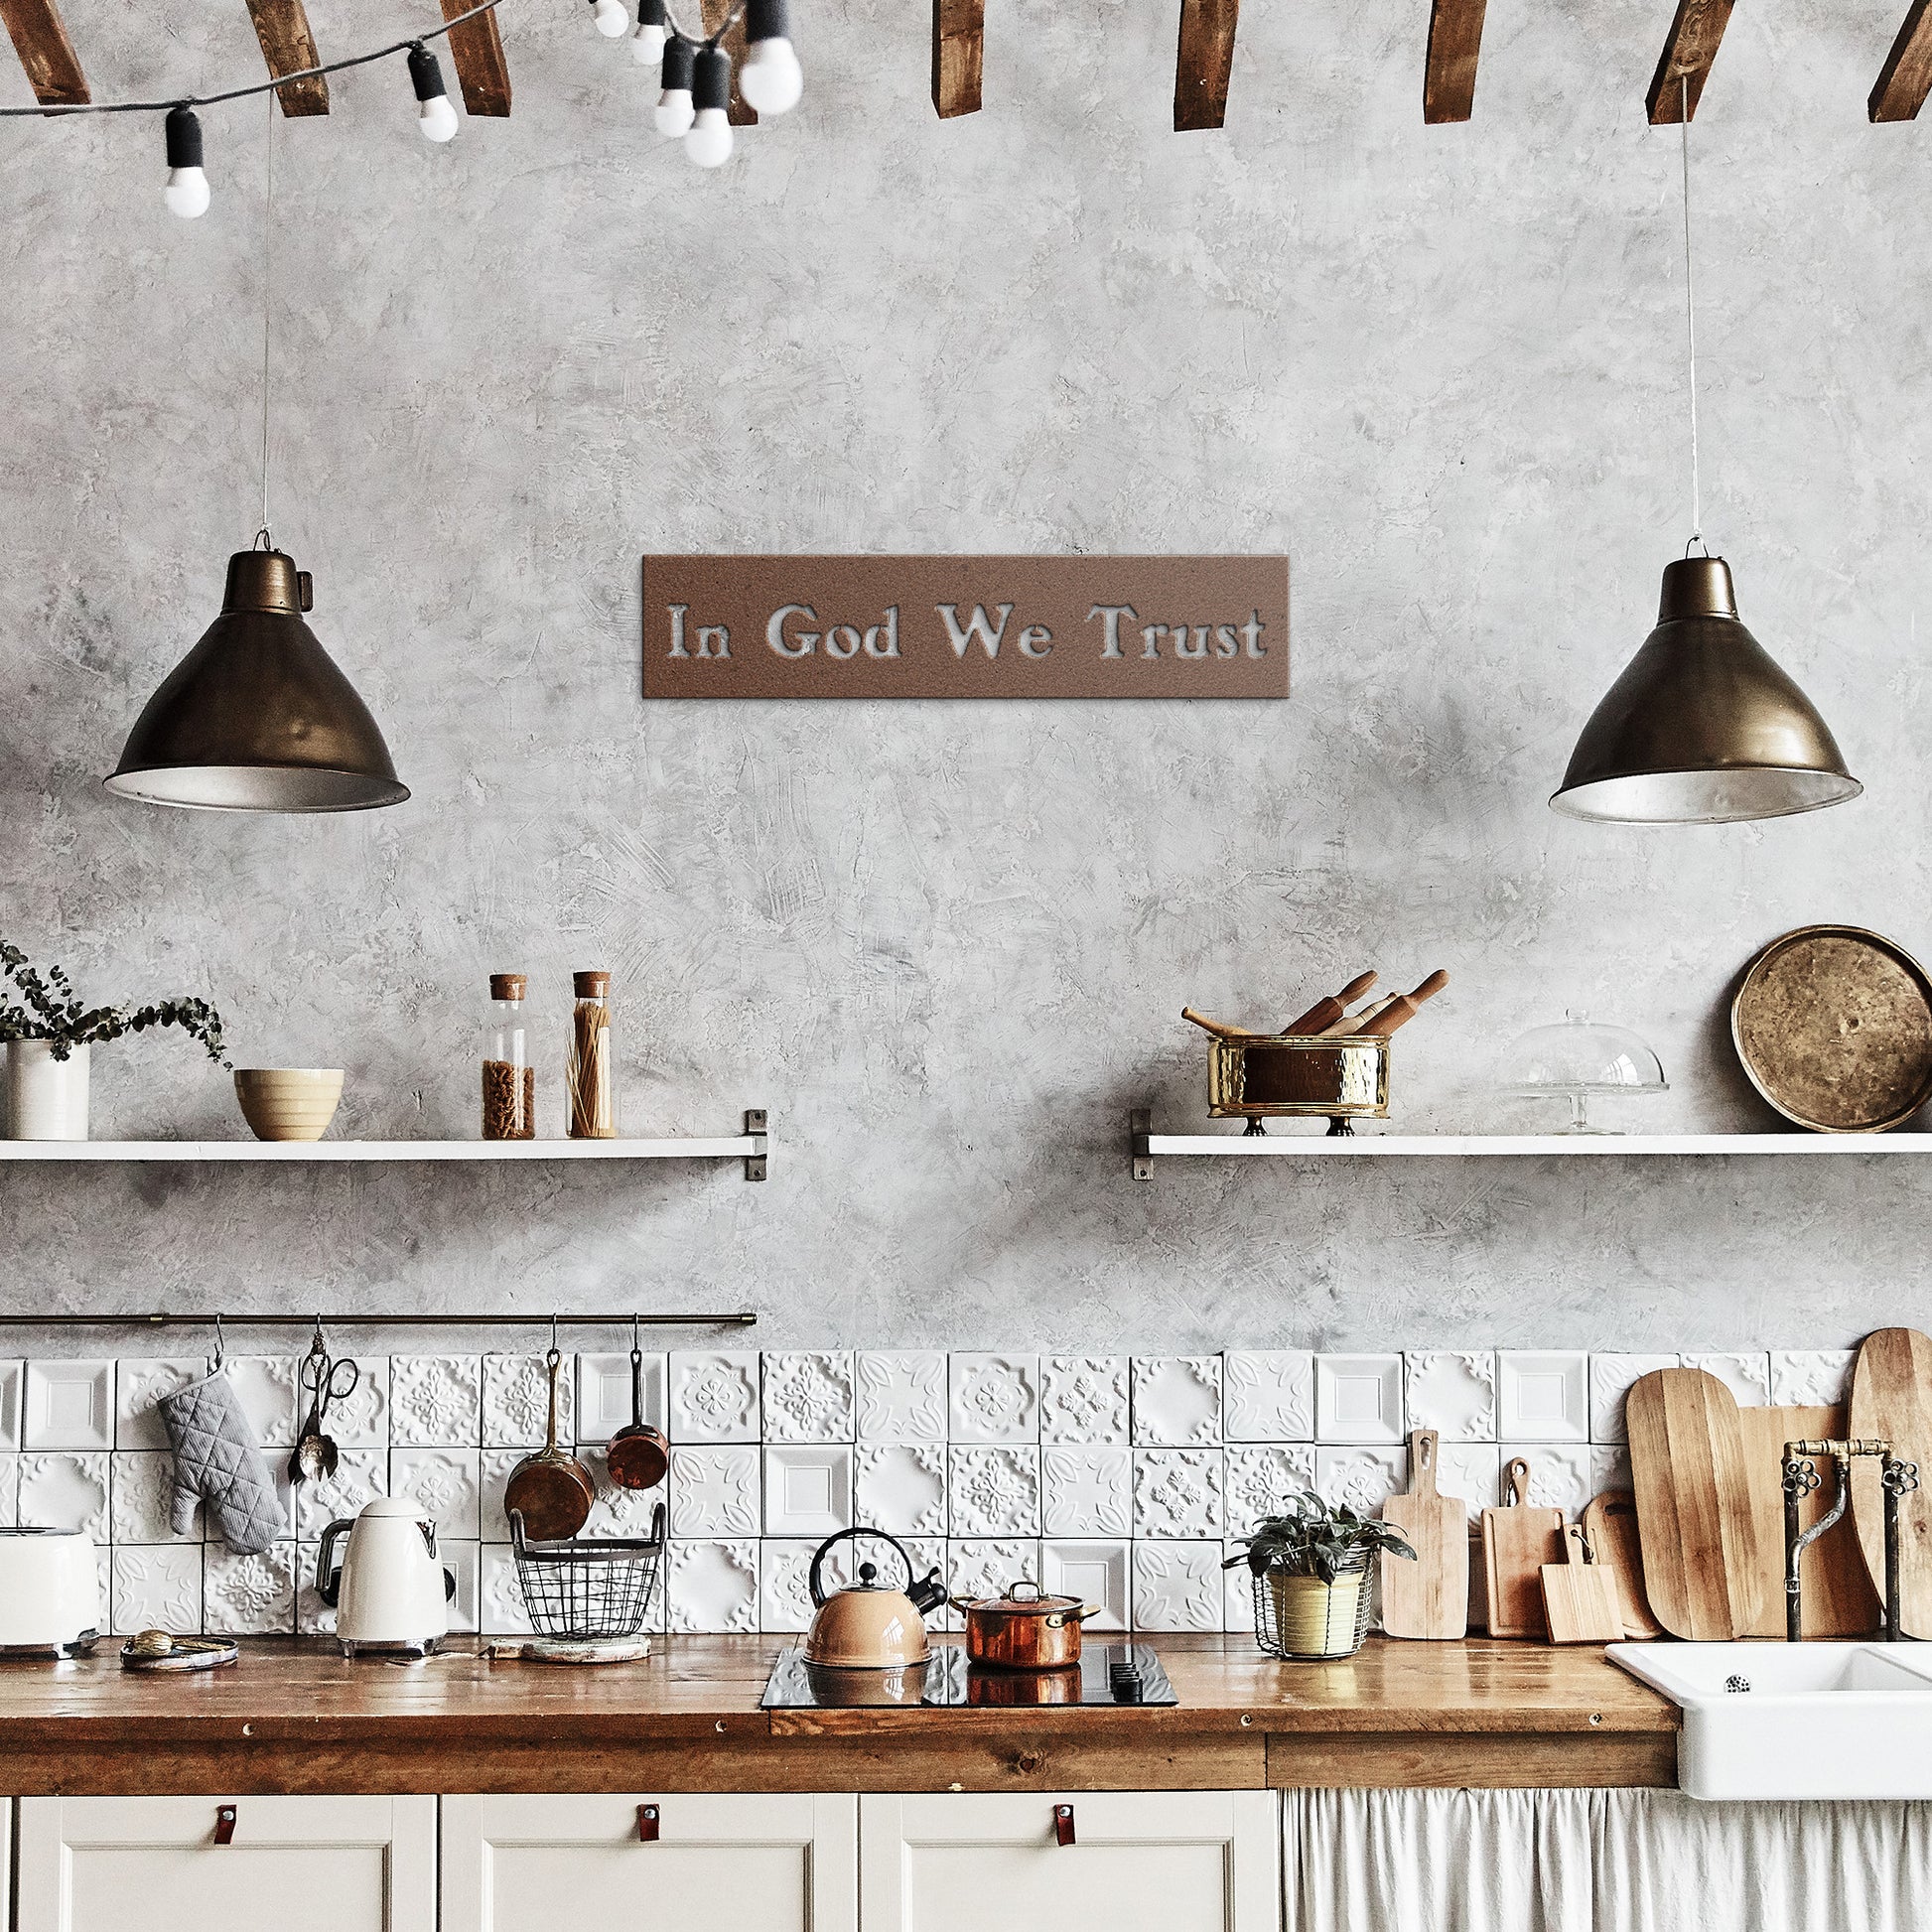 Faith and patriotism symbolized in "In God We Trust" steel sign